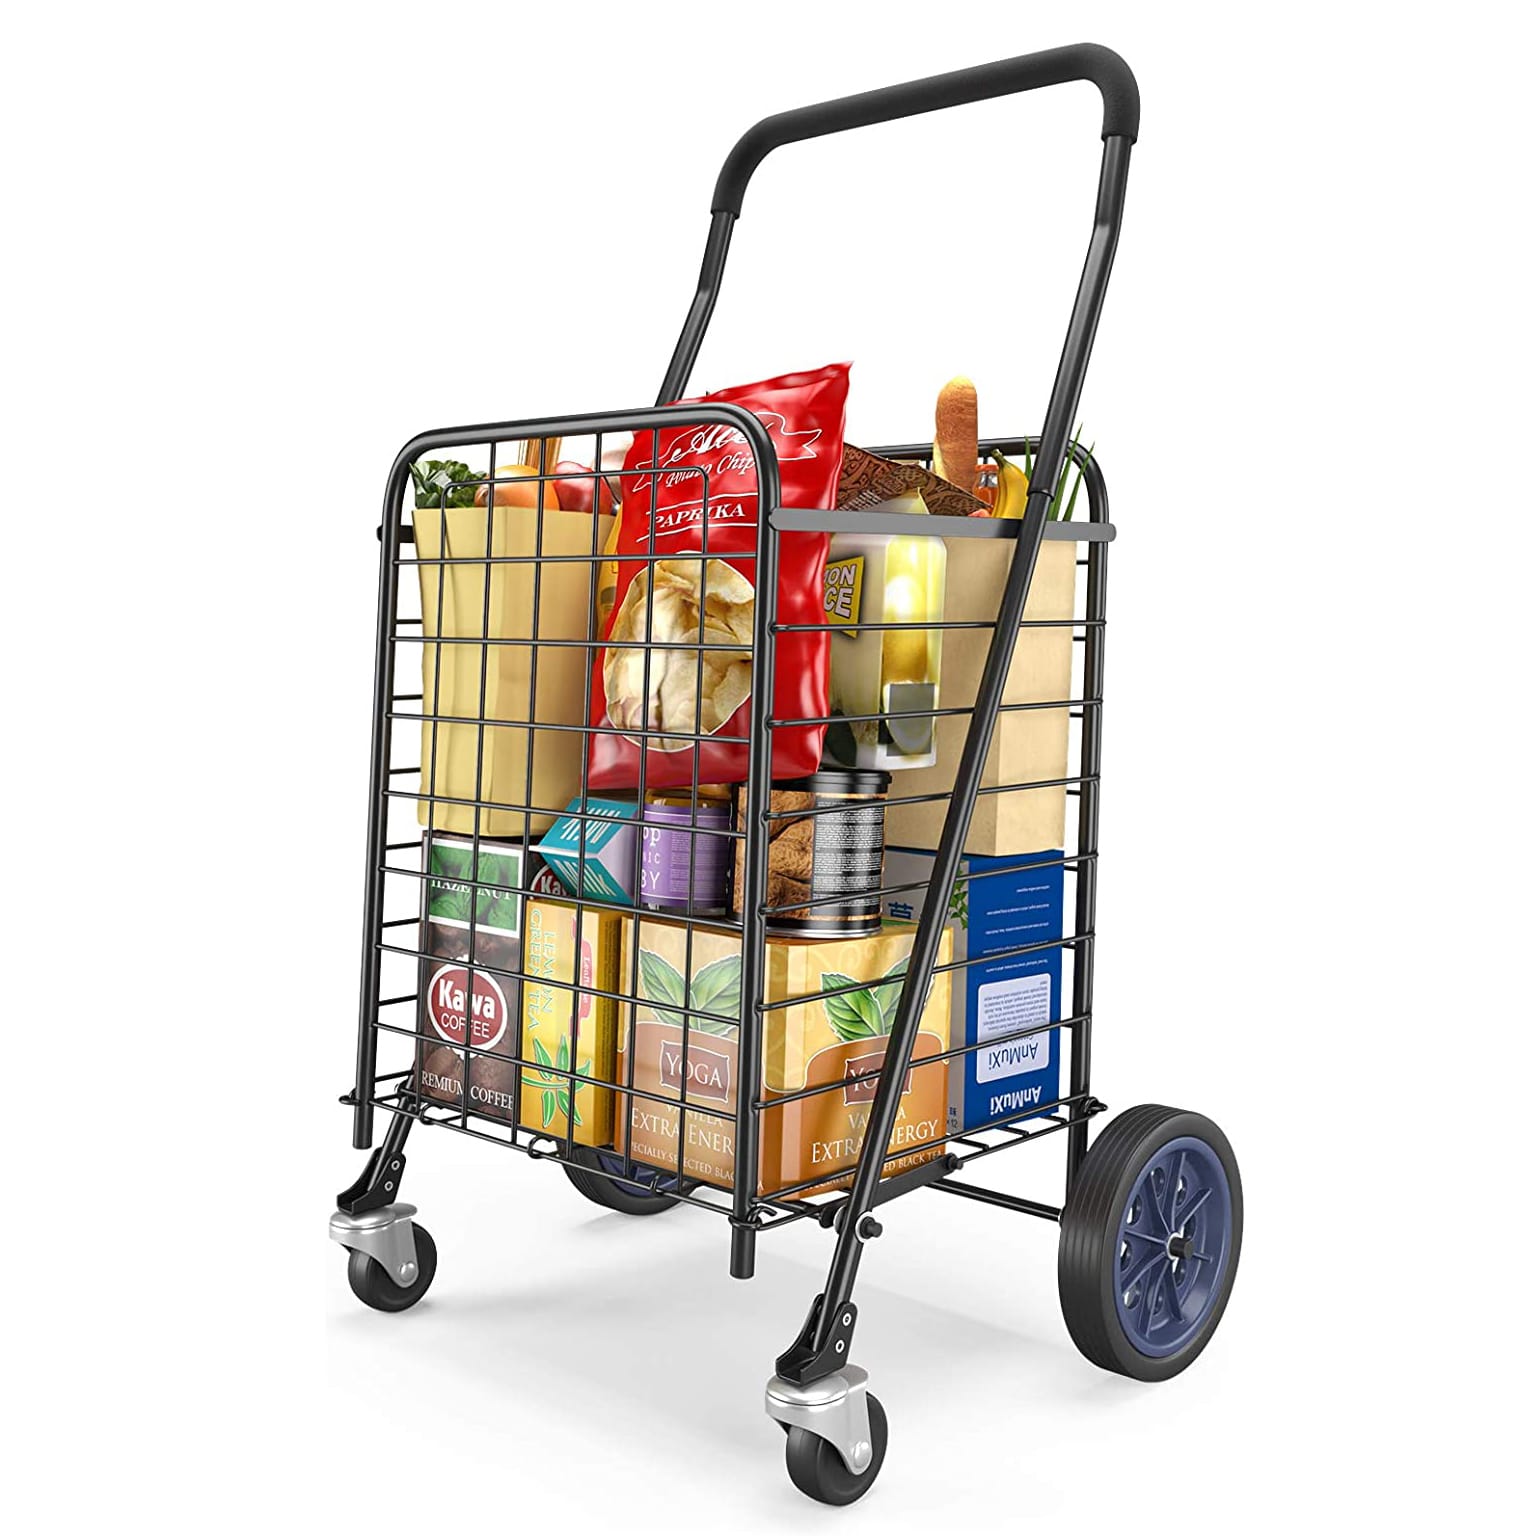 Folding Shopping Cart Black Trolley Dolly Grocery Laundry Utility Cart with Wheel & Removable Waterproof Canvas Bag 